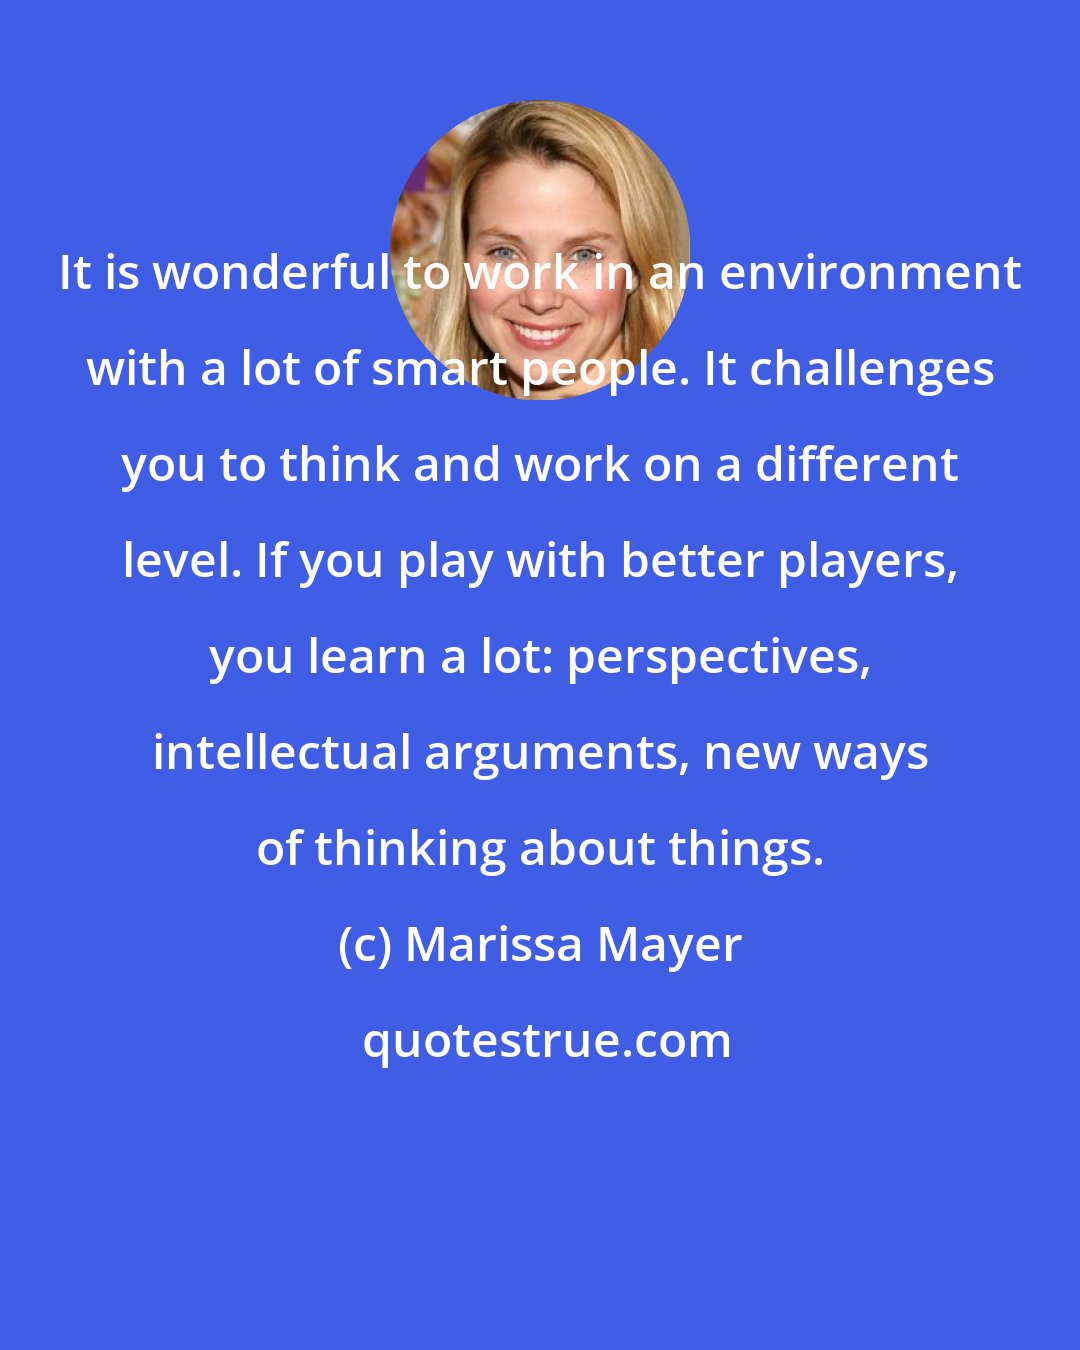 Marissa Mayer: It is wonderful to work in an environment with a lot of smart people. It challenges you to think and work on a different level. If you play with better players, you learn a lot: perspectives, intellectual arguments, new ways of thinking about things.